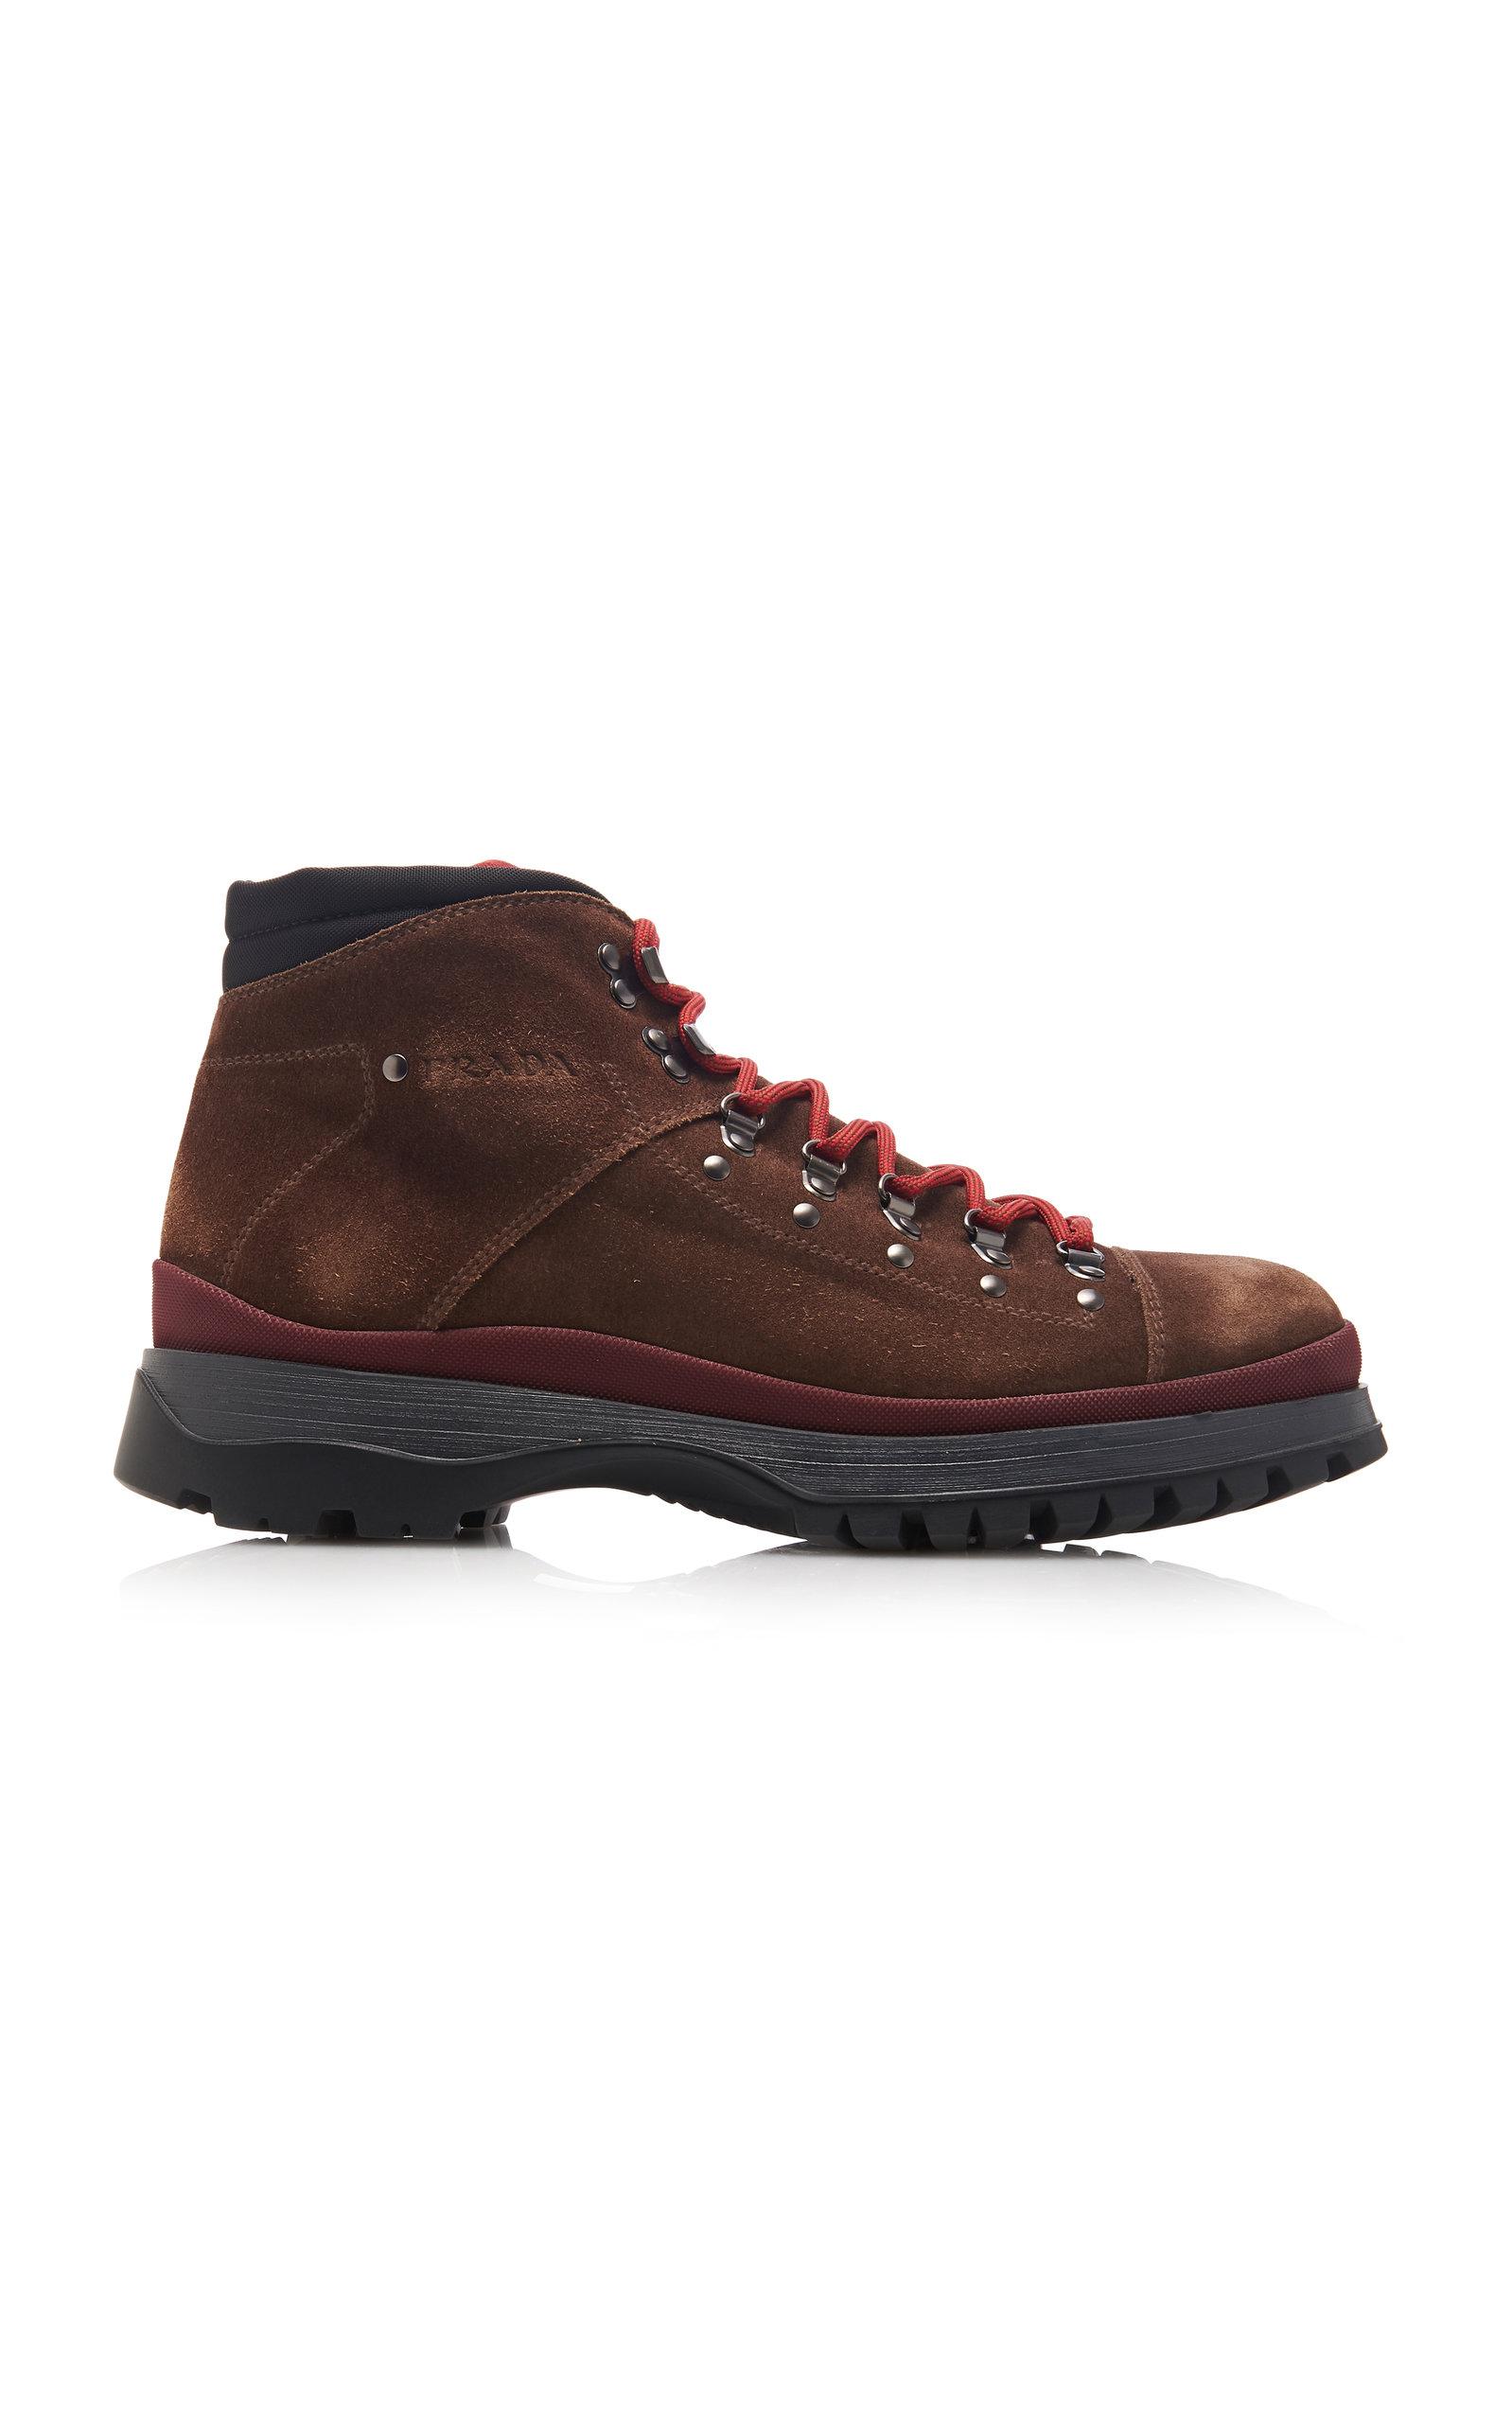 Prada Leather Suede Hiking Boot in Brown for Men - Save 38% - Lyst